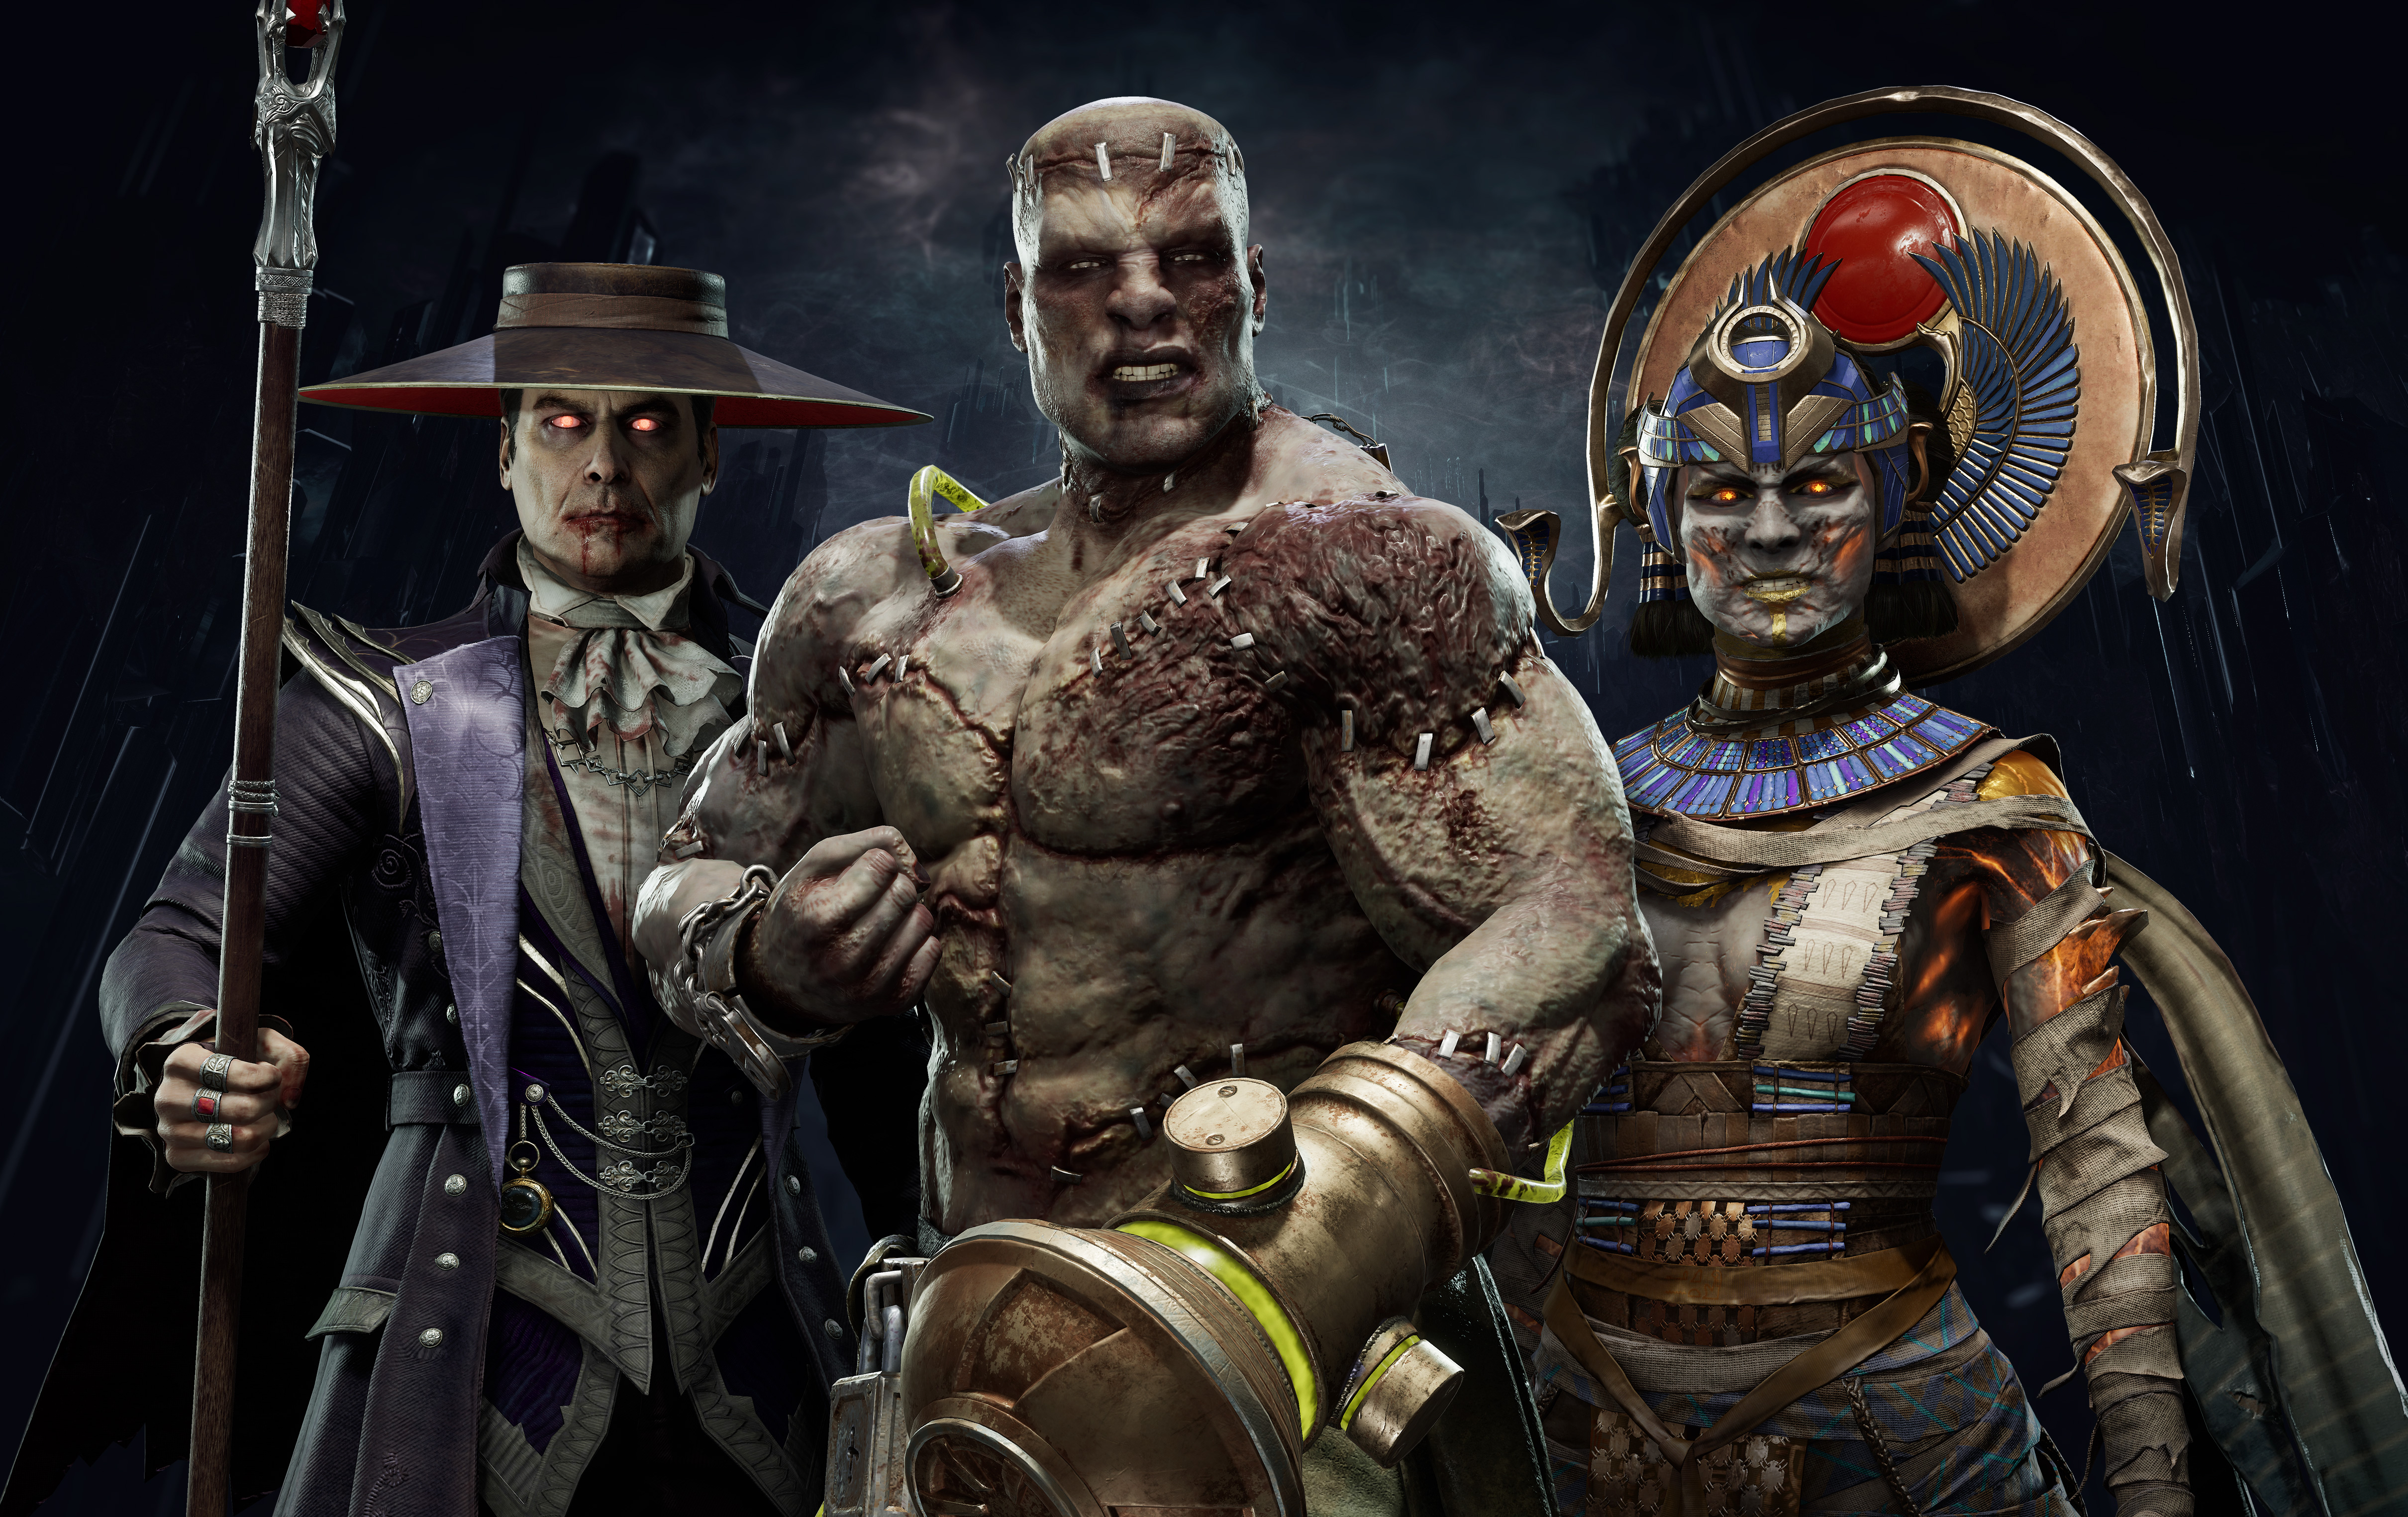 Have A Closer Look At The New Characters In Mortal Kombat 